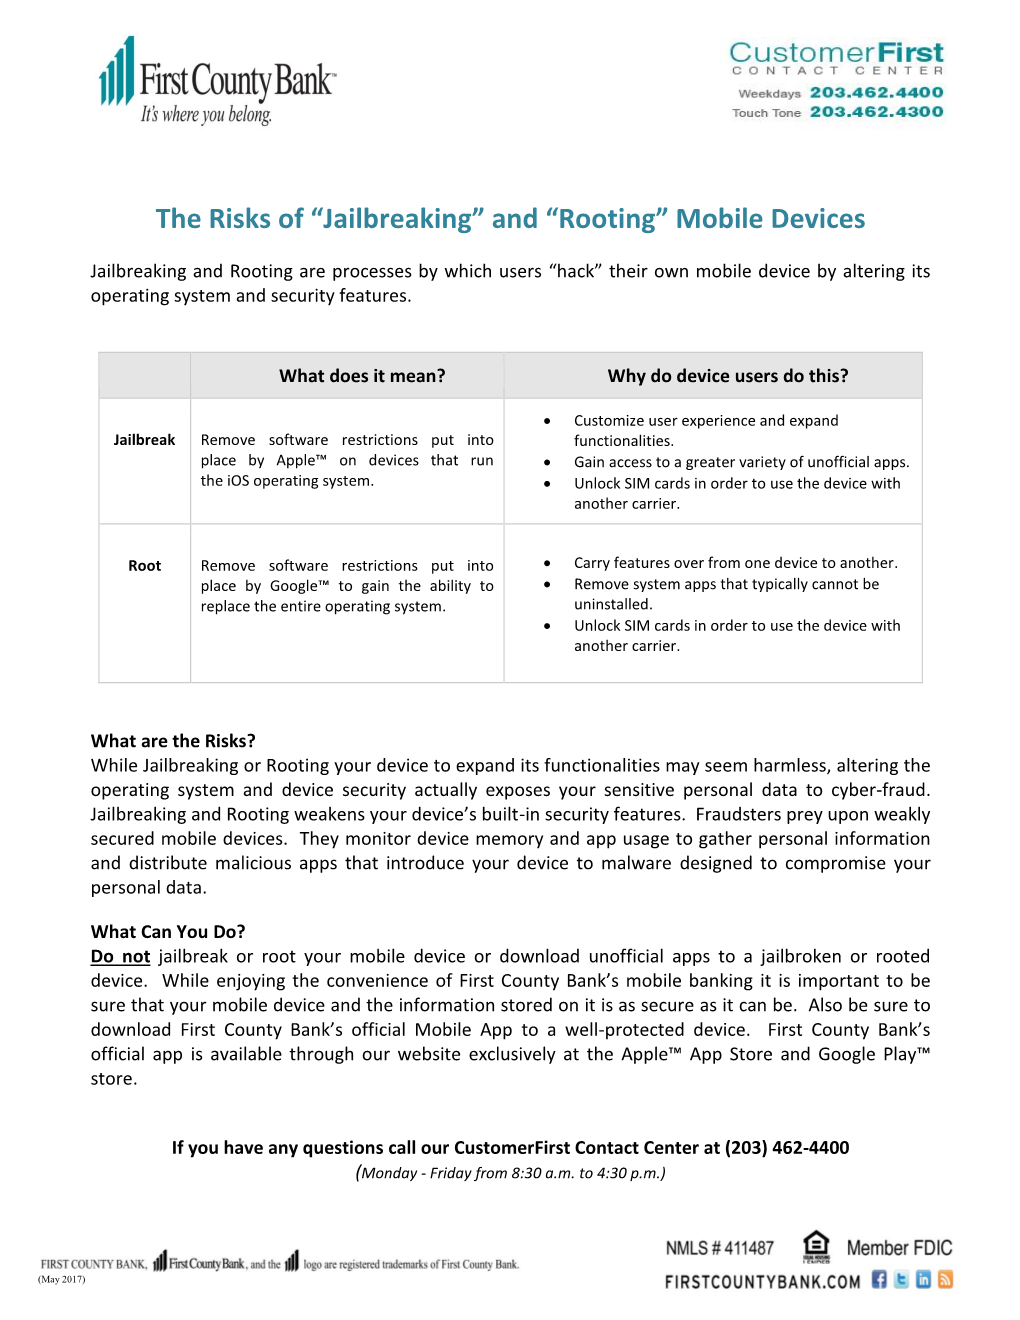 The Risks of “Jailbreaking” and “Rooting” Mobile Devices